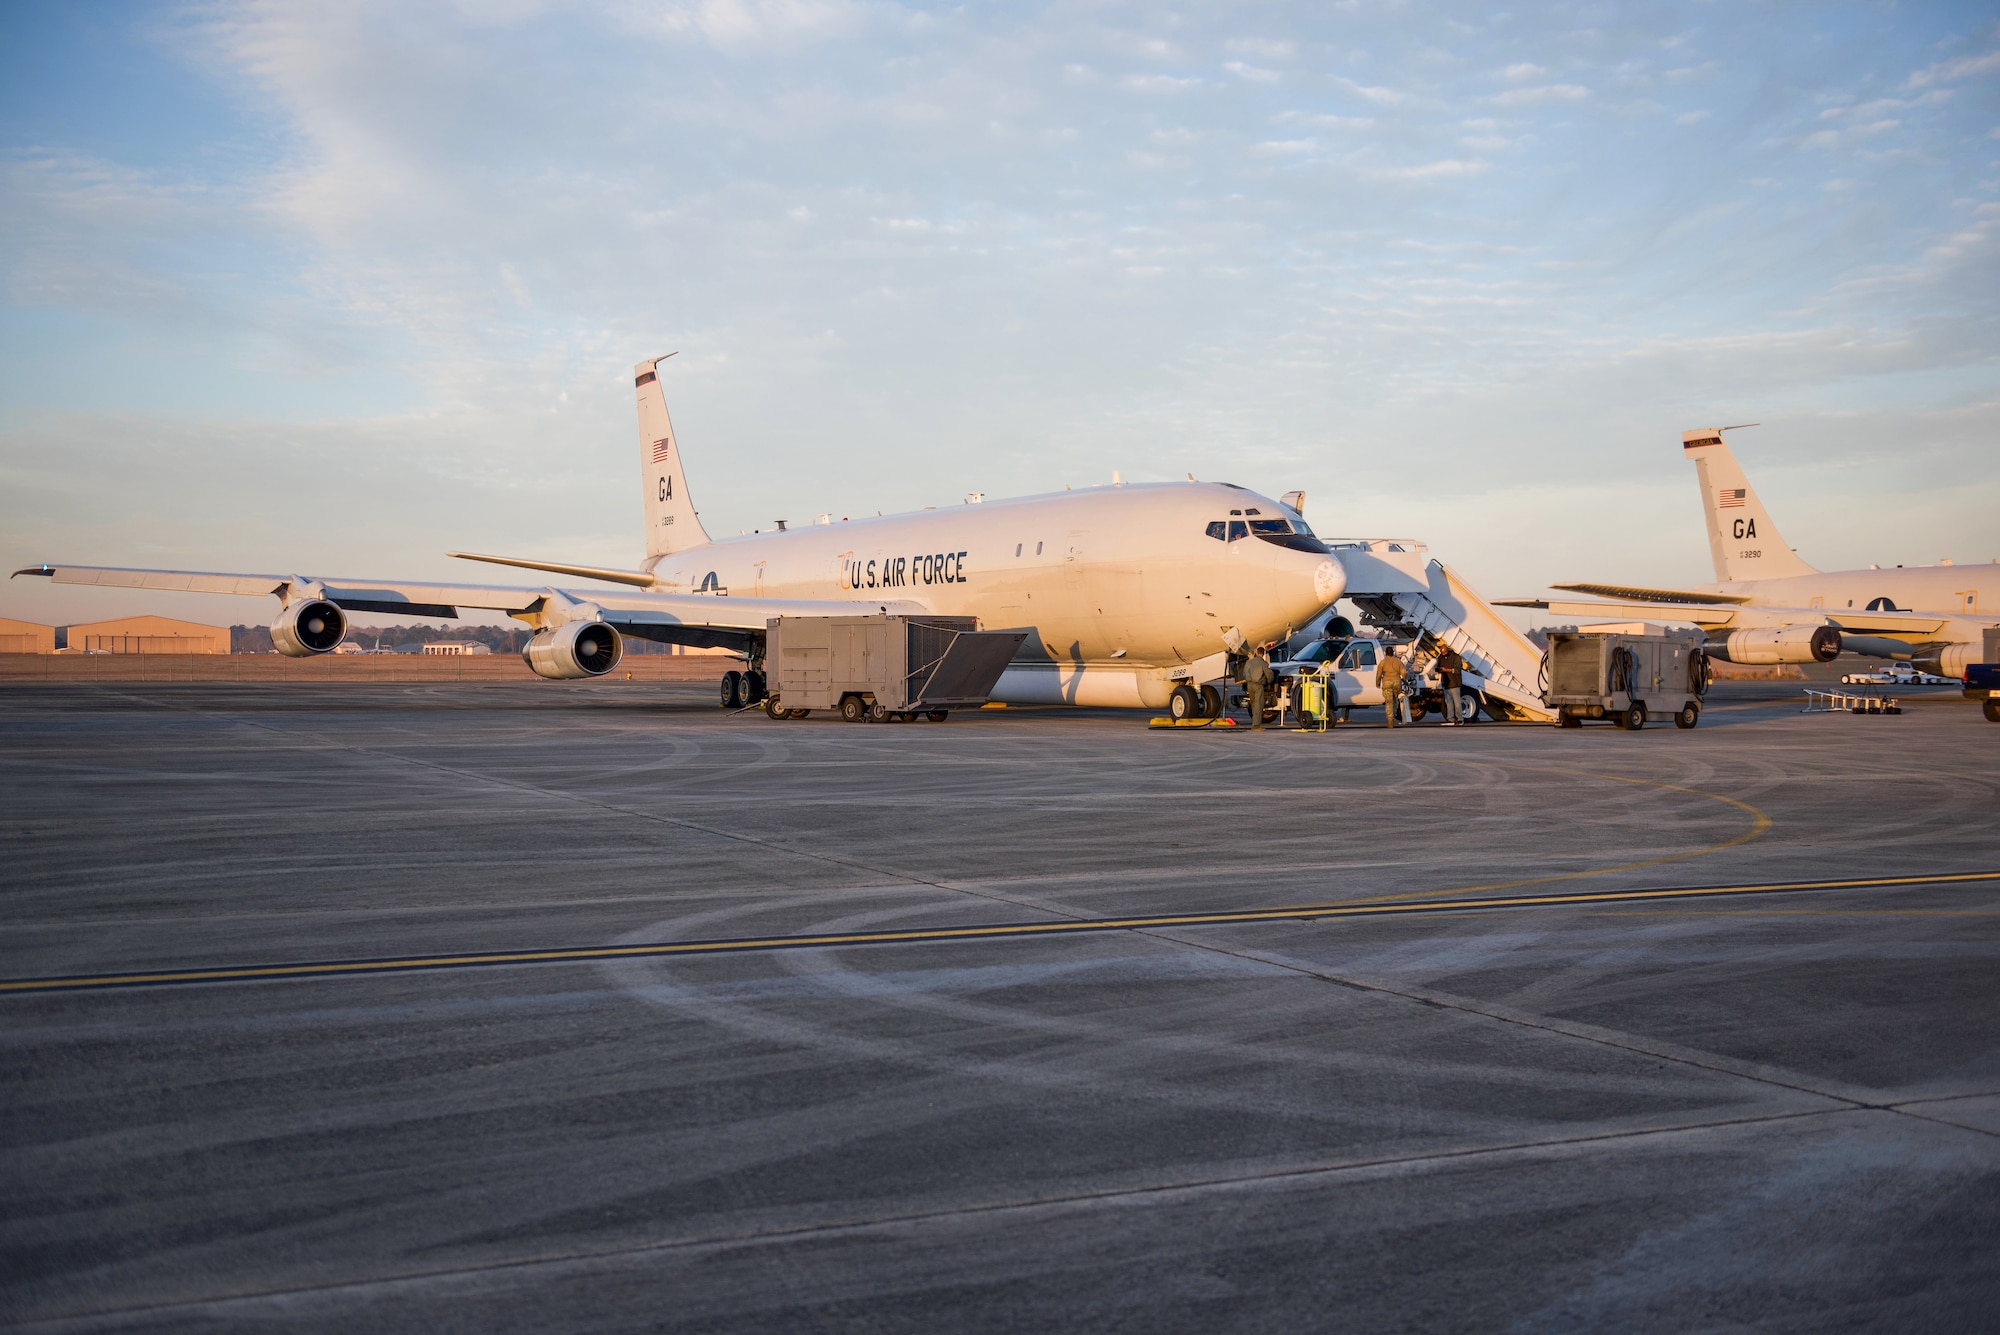 U.S. Airmen with the 116th and 461st Maintenance Groups make final preparations prior to departure of E-8C Joint STARS aircraft 92-3289 at Robins Air Force Base, Georgia, Feb. 11, 2022. The aircraft has been in military service since 1996 and will retire to its final resting place with the 309th Aerospace Maintenance and Regeneration Group at Davis-Monthan Air Force Base, Arizona. (U.S. Air National Guard photo by Tech. Sgt. Michelle Self)